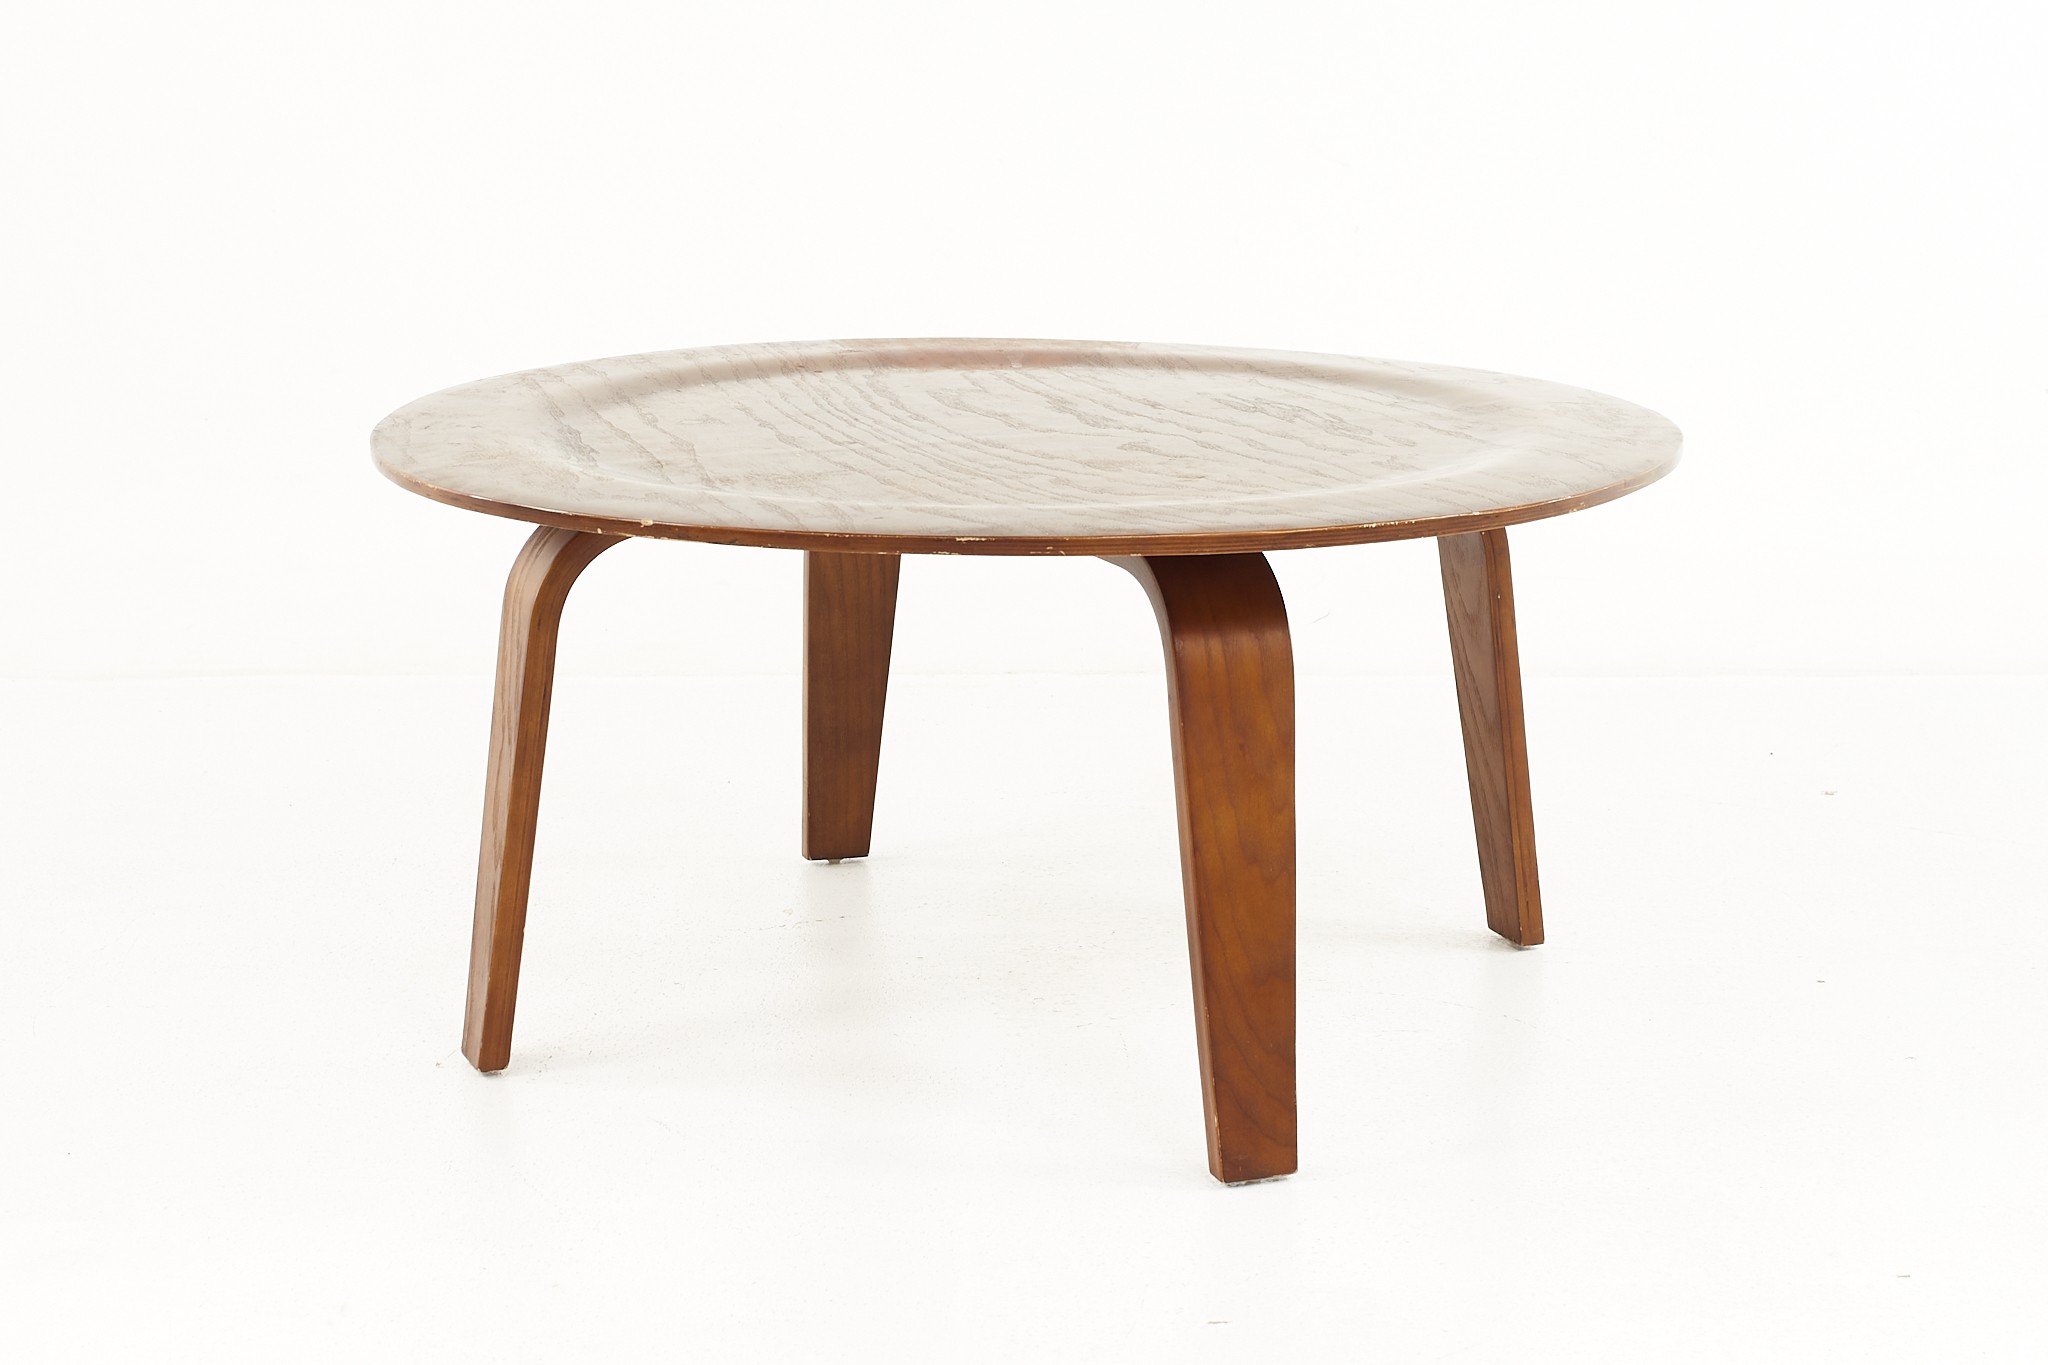 Eames Style Mid Century Bentwood Round Coffee Table